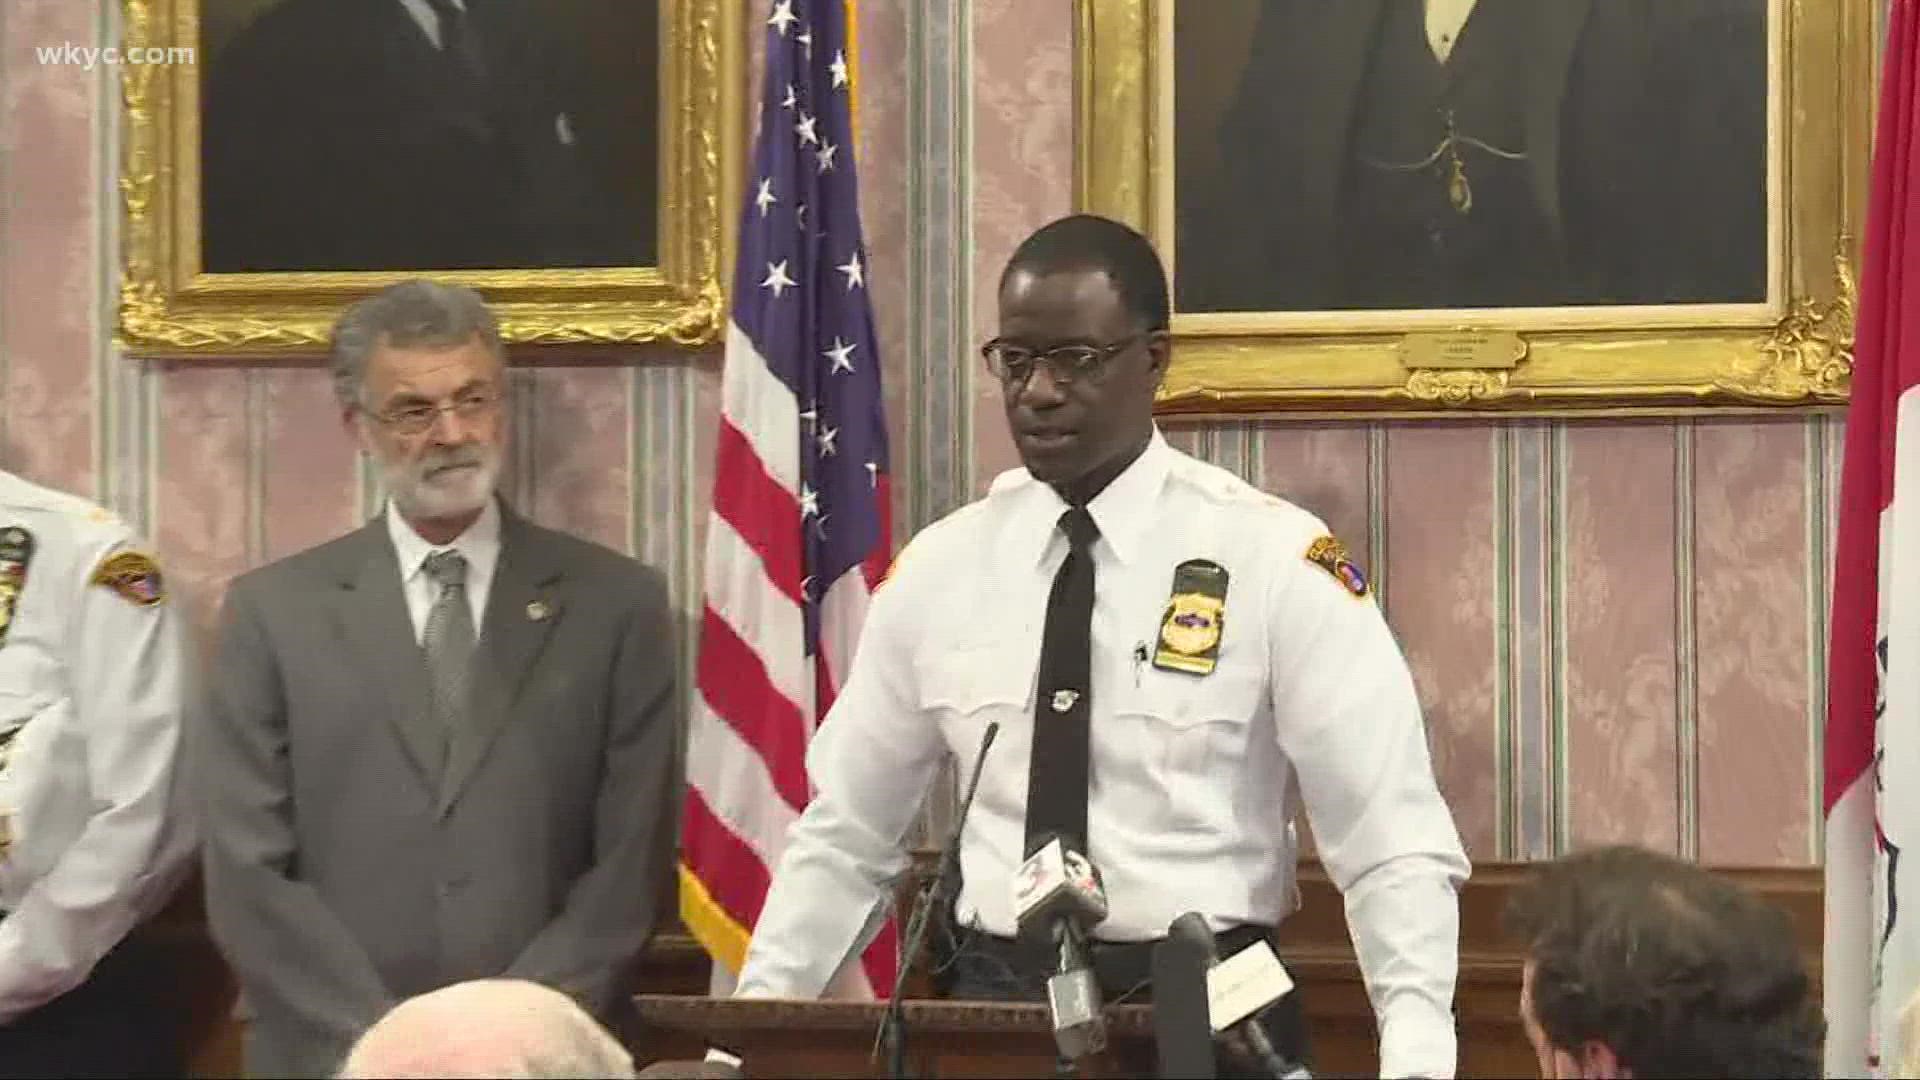 "This is my last official act. I'm going to miss you guys," Williams told officers at a police awards ceremony as he announced his resignation.